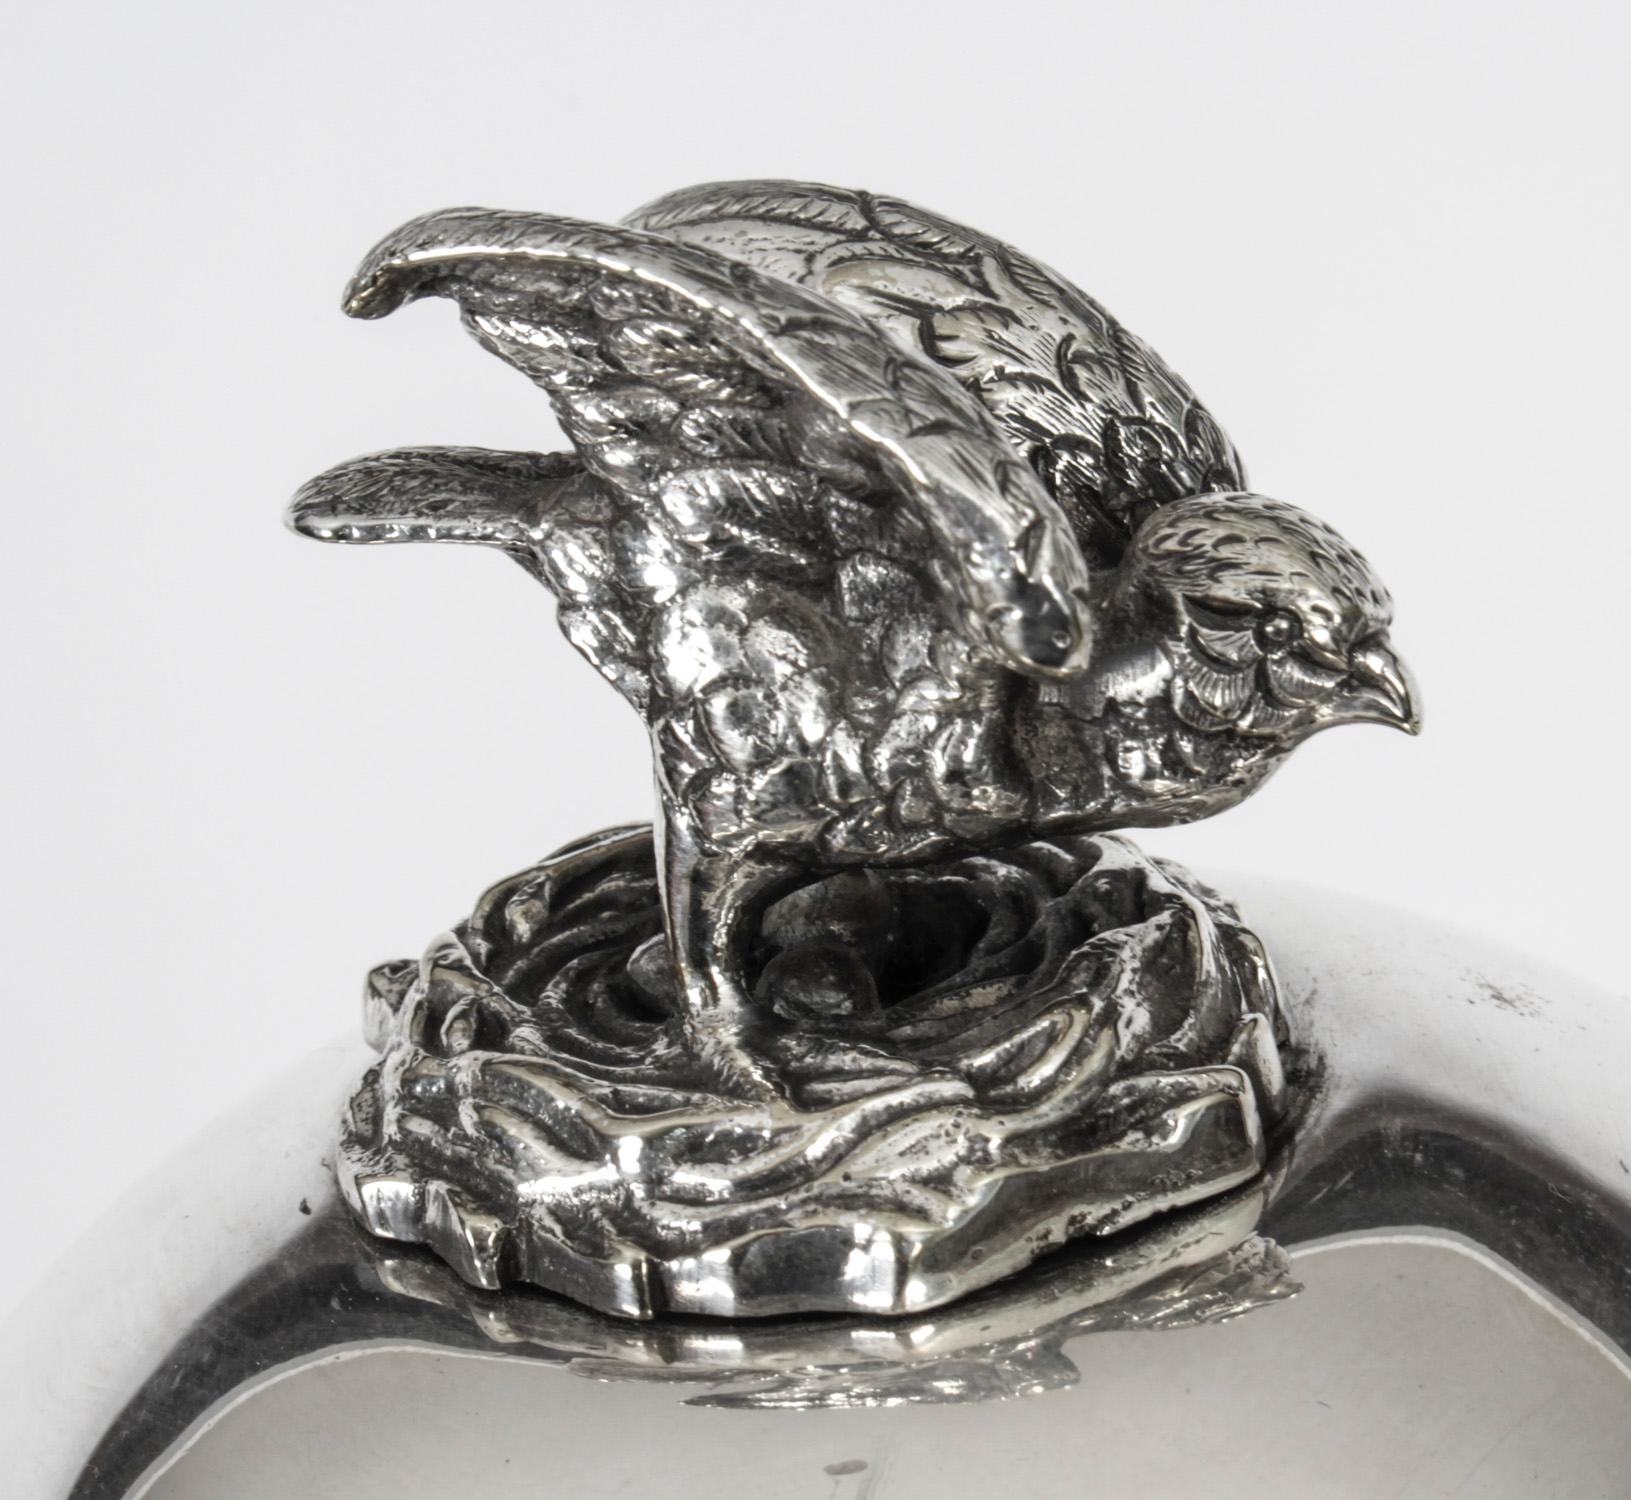 Antique vicrorian silver plated egg coddler / boiler circa 1860 in date.
 
The cylindrical shaped body features an winged Kestrel bird finial to the domed lid which contains a frame to hold the eggs while they are cooked. It is raised on a